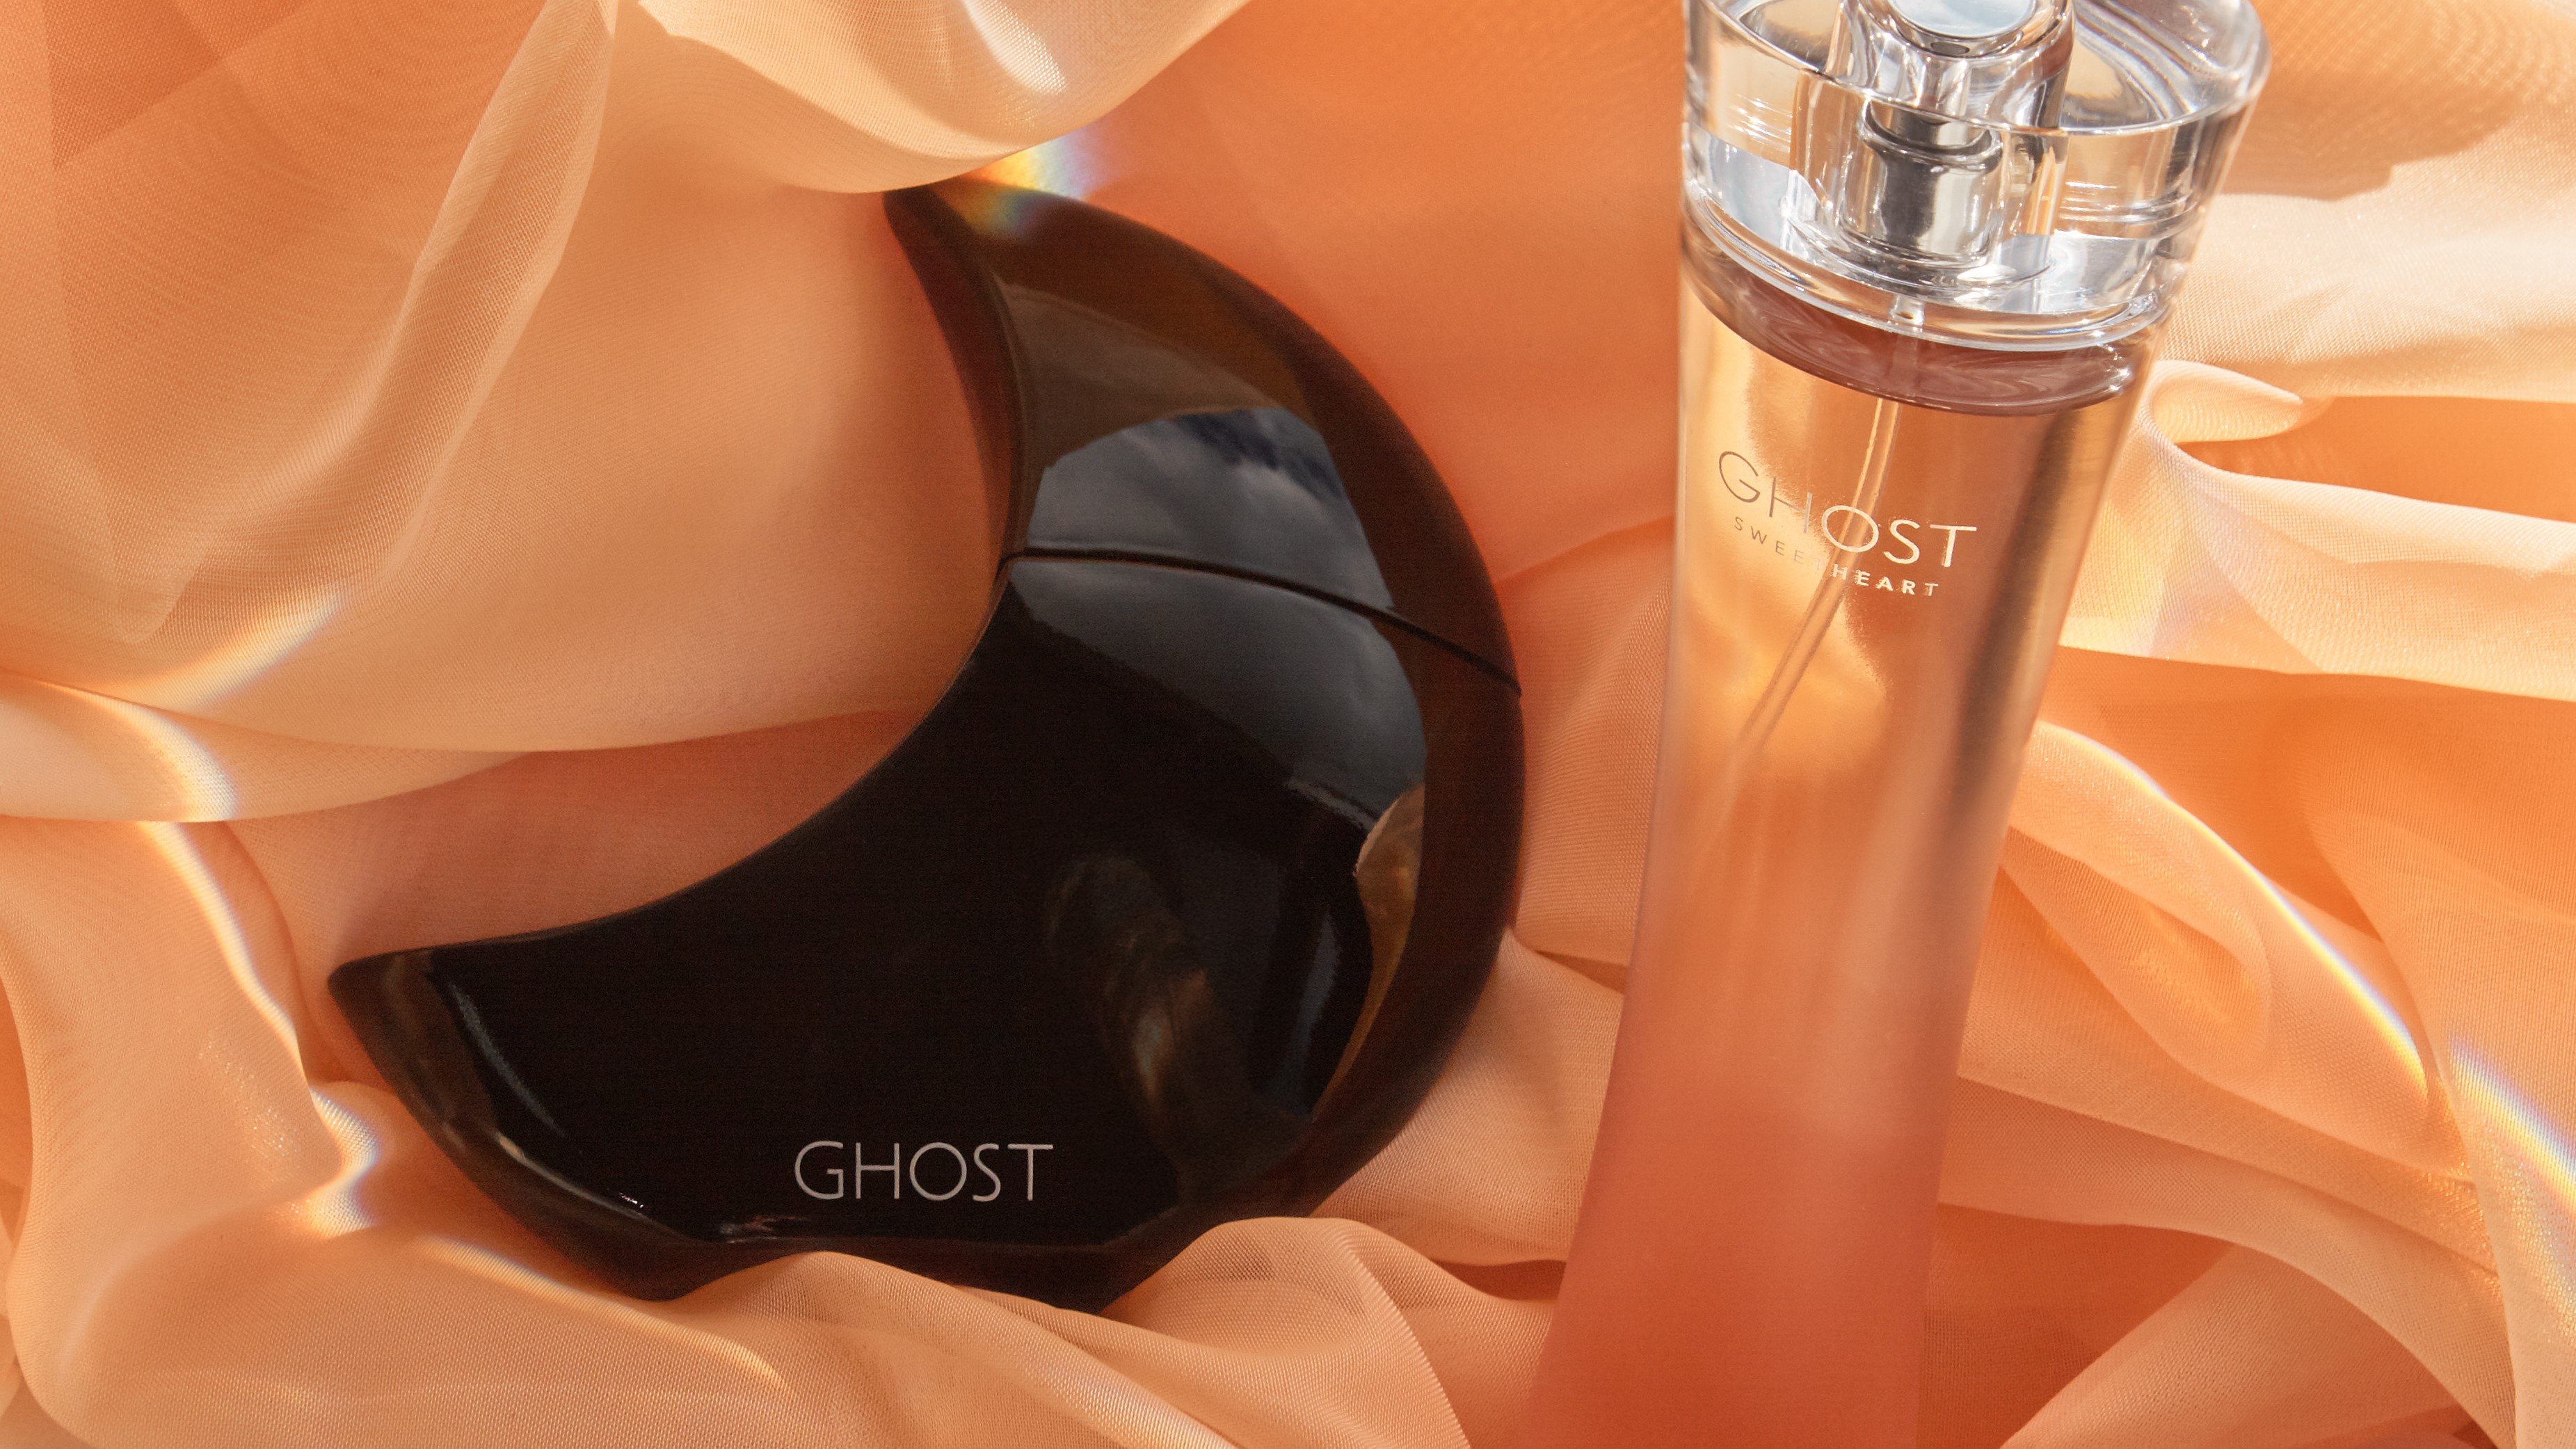 Two GHOST perfumes against a soft peach coloured fabric background